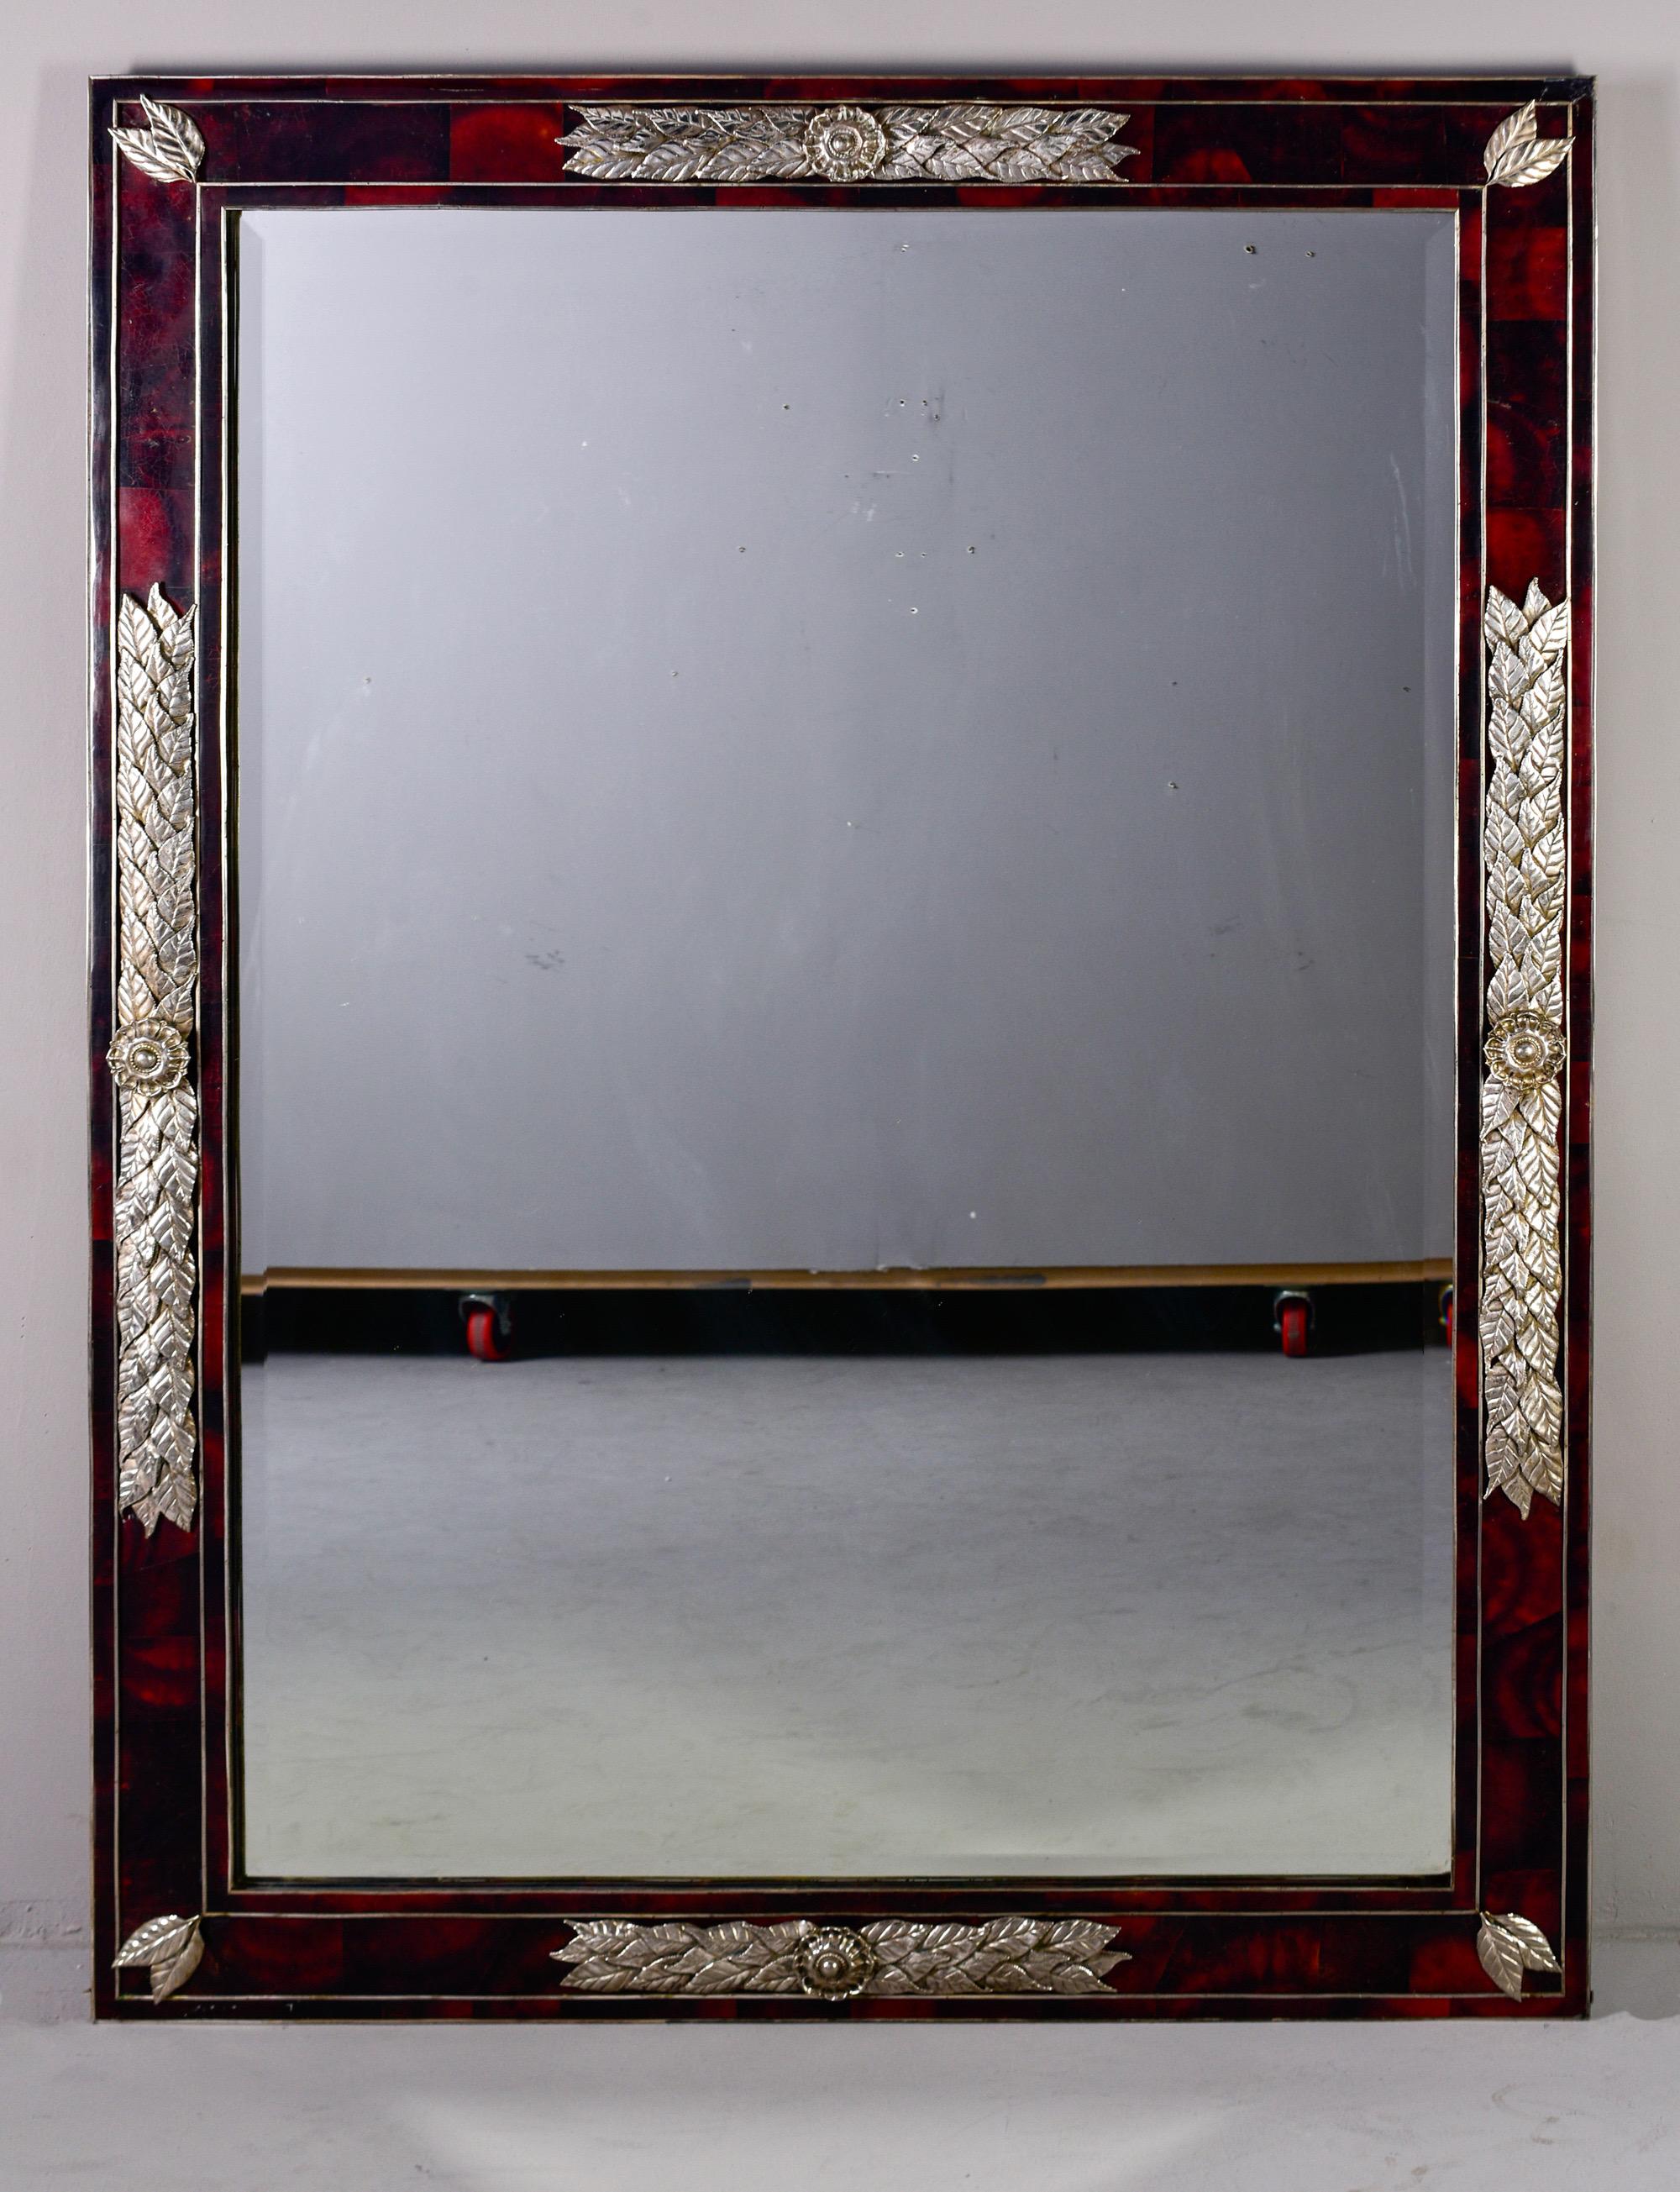 Circa 1980s large designer mirror features a frame of faux tortoise patterned glass that is embellished with silver plated floral mounts. The mirror has a beveled edge and is quite heavy and substantial. Mirror can be hung vertically or